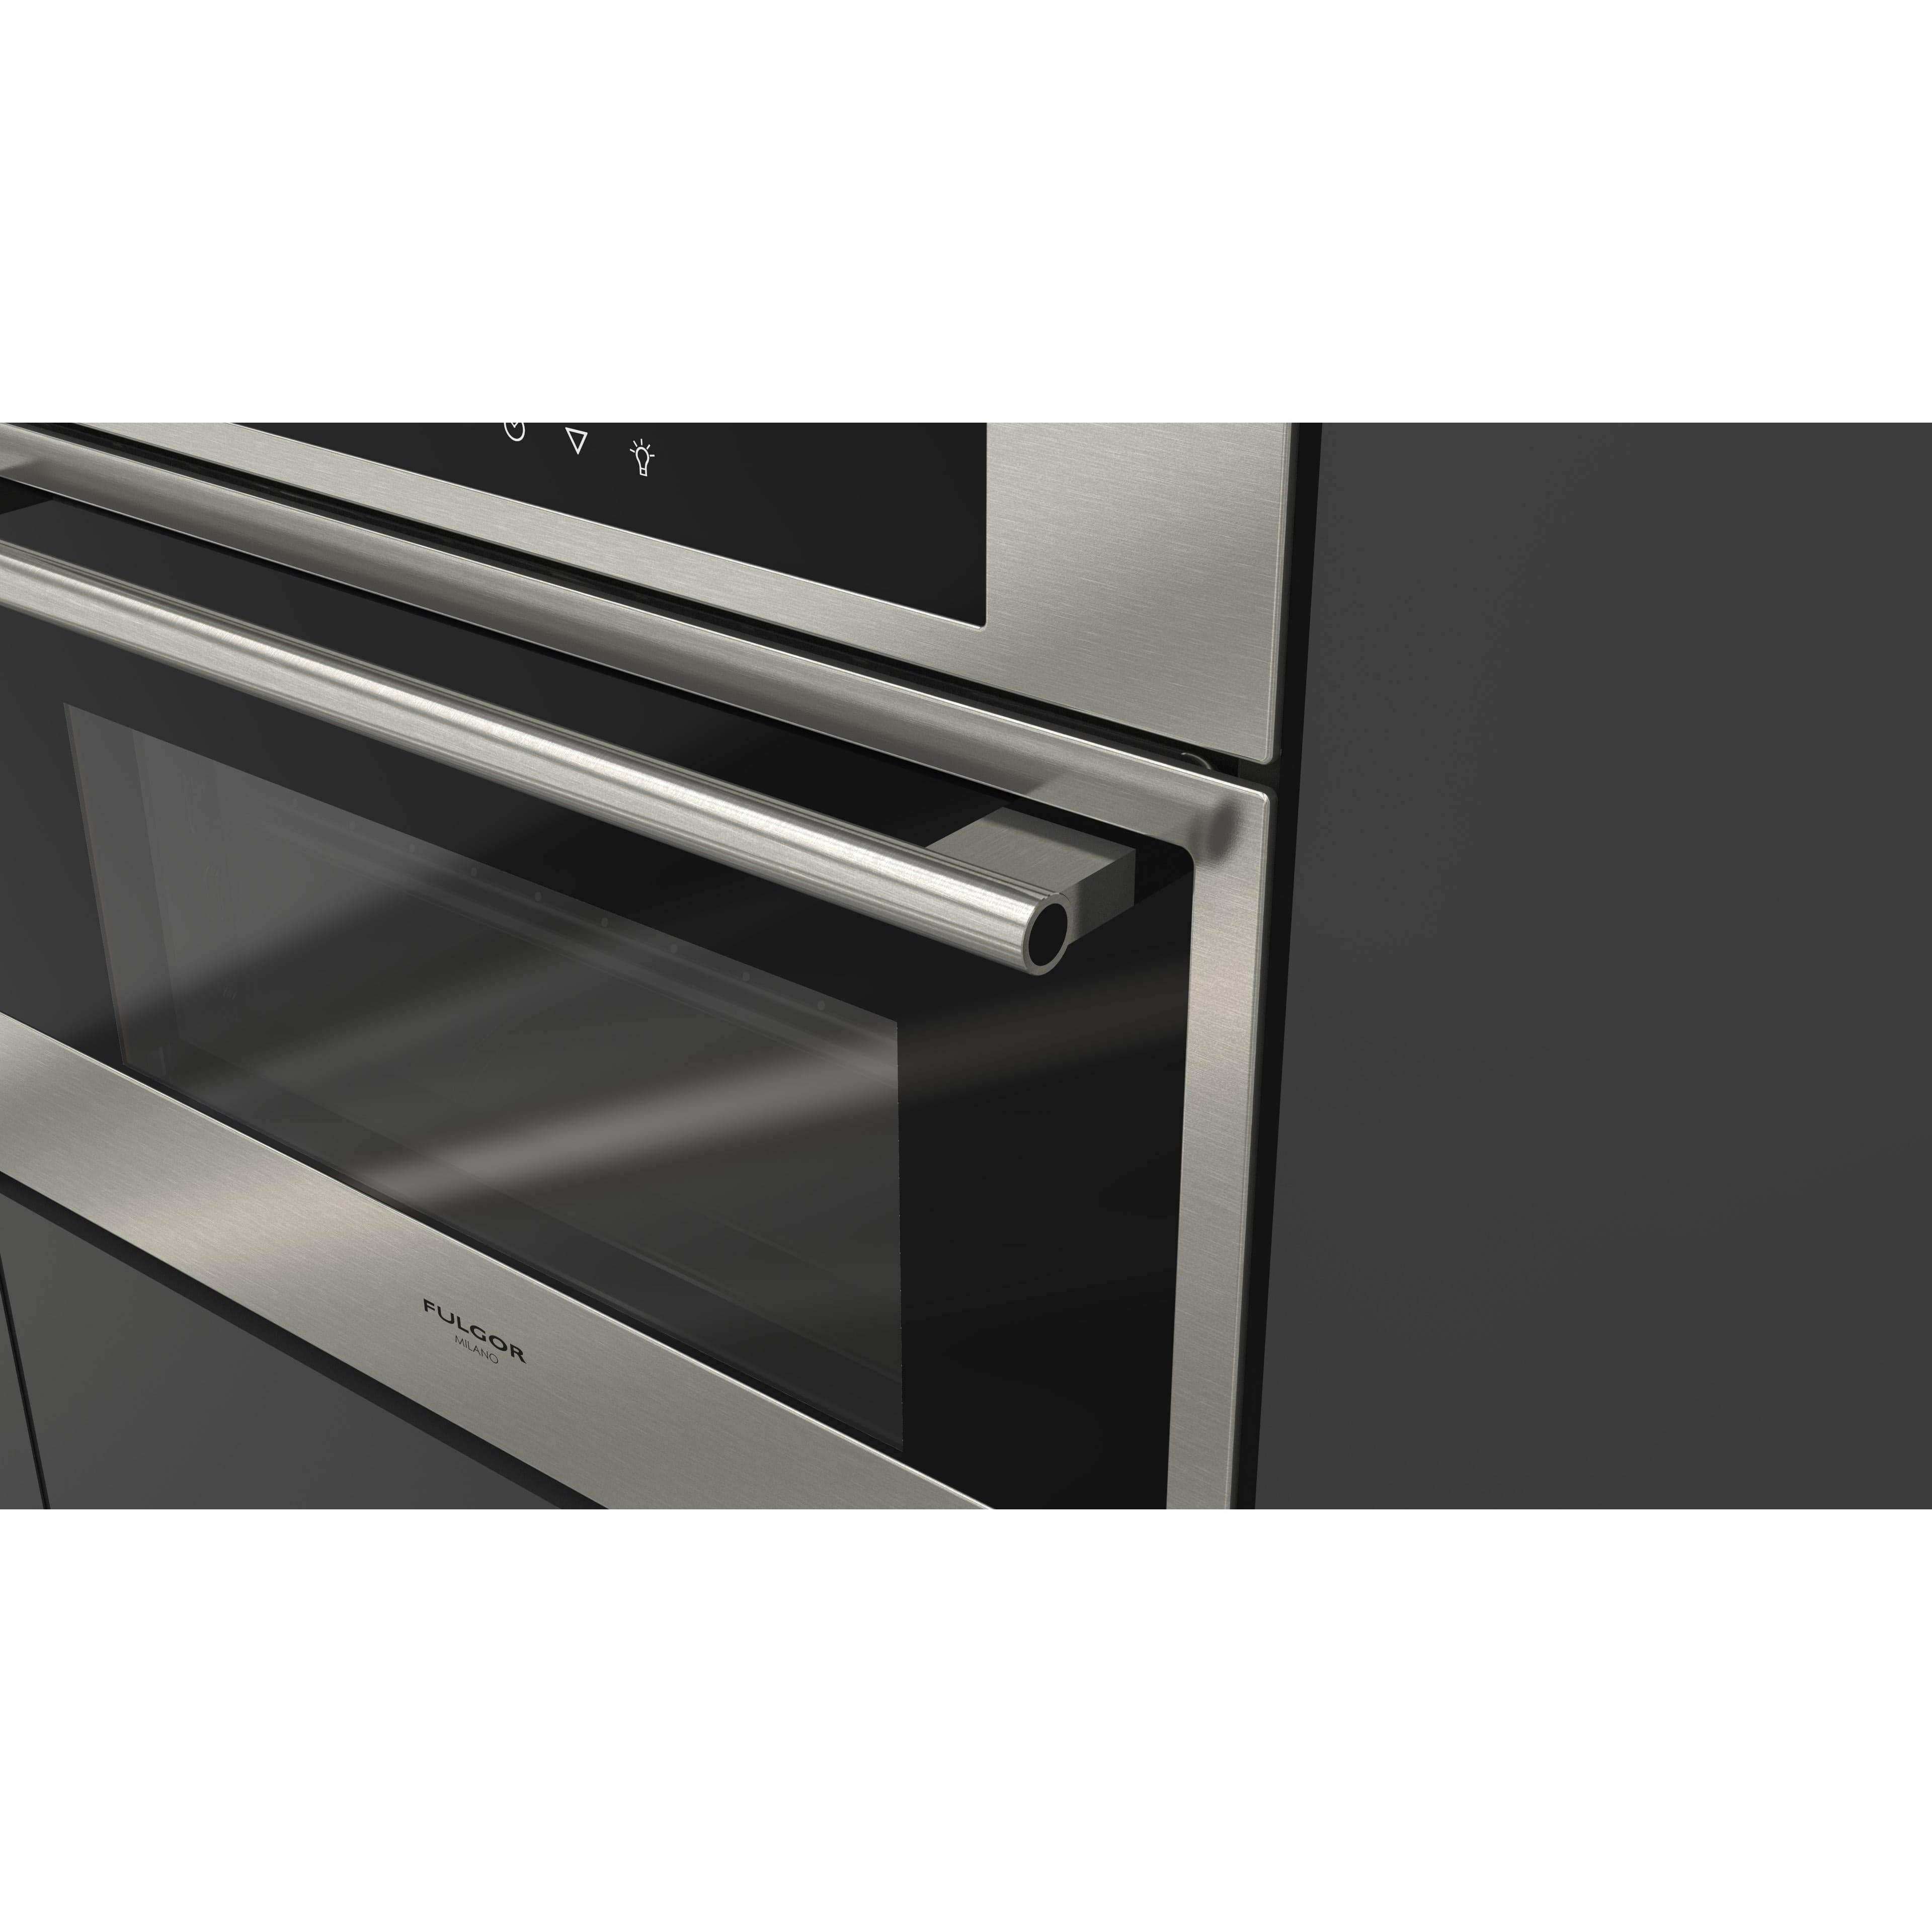 Fulgor Milano 24" Built-In Single Steam Wall Oven with Creactive Cooking System - F7SCO24S1 Ovens F7SCO24S1 Luxury Appliances Direct